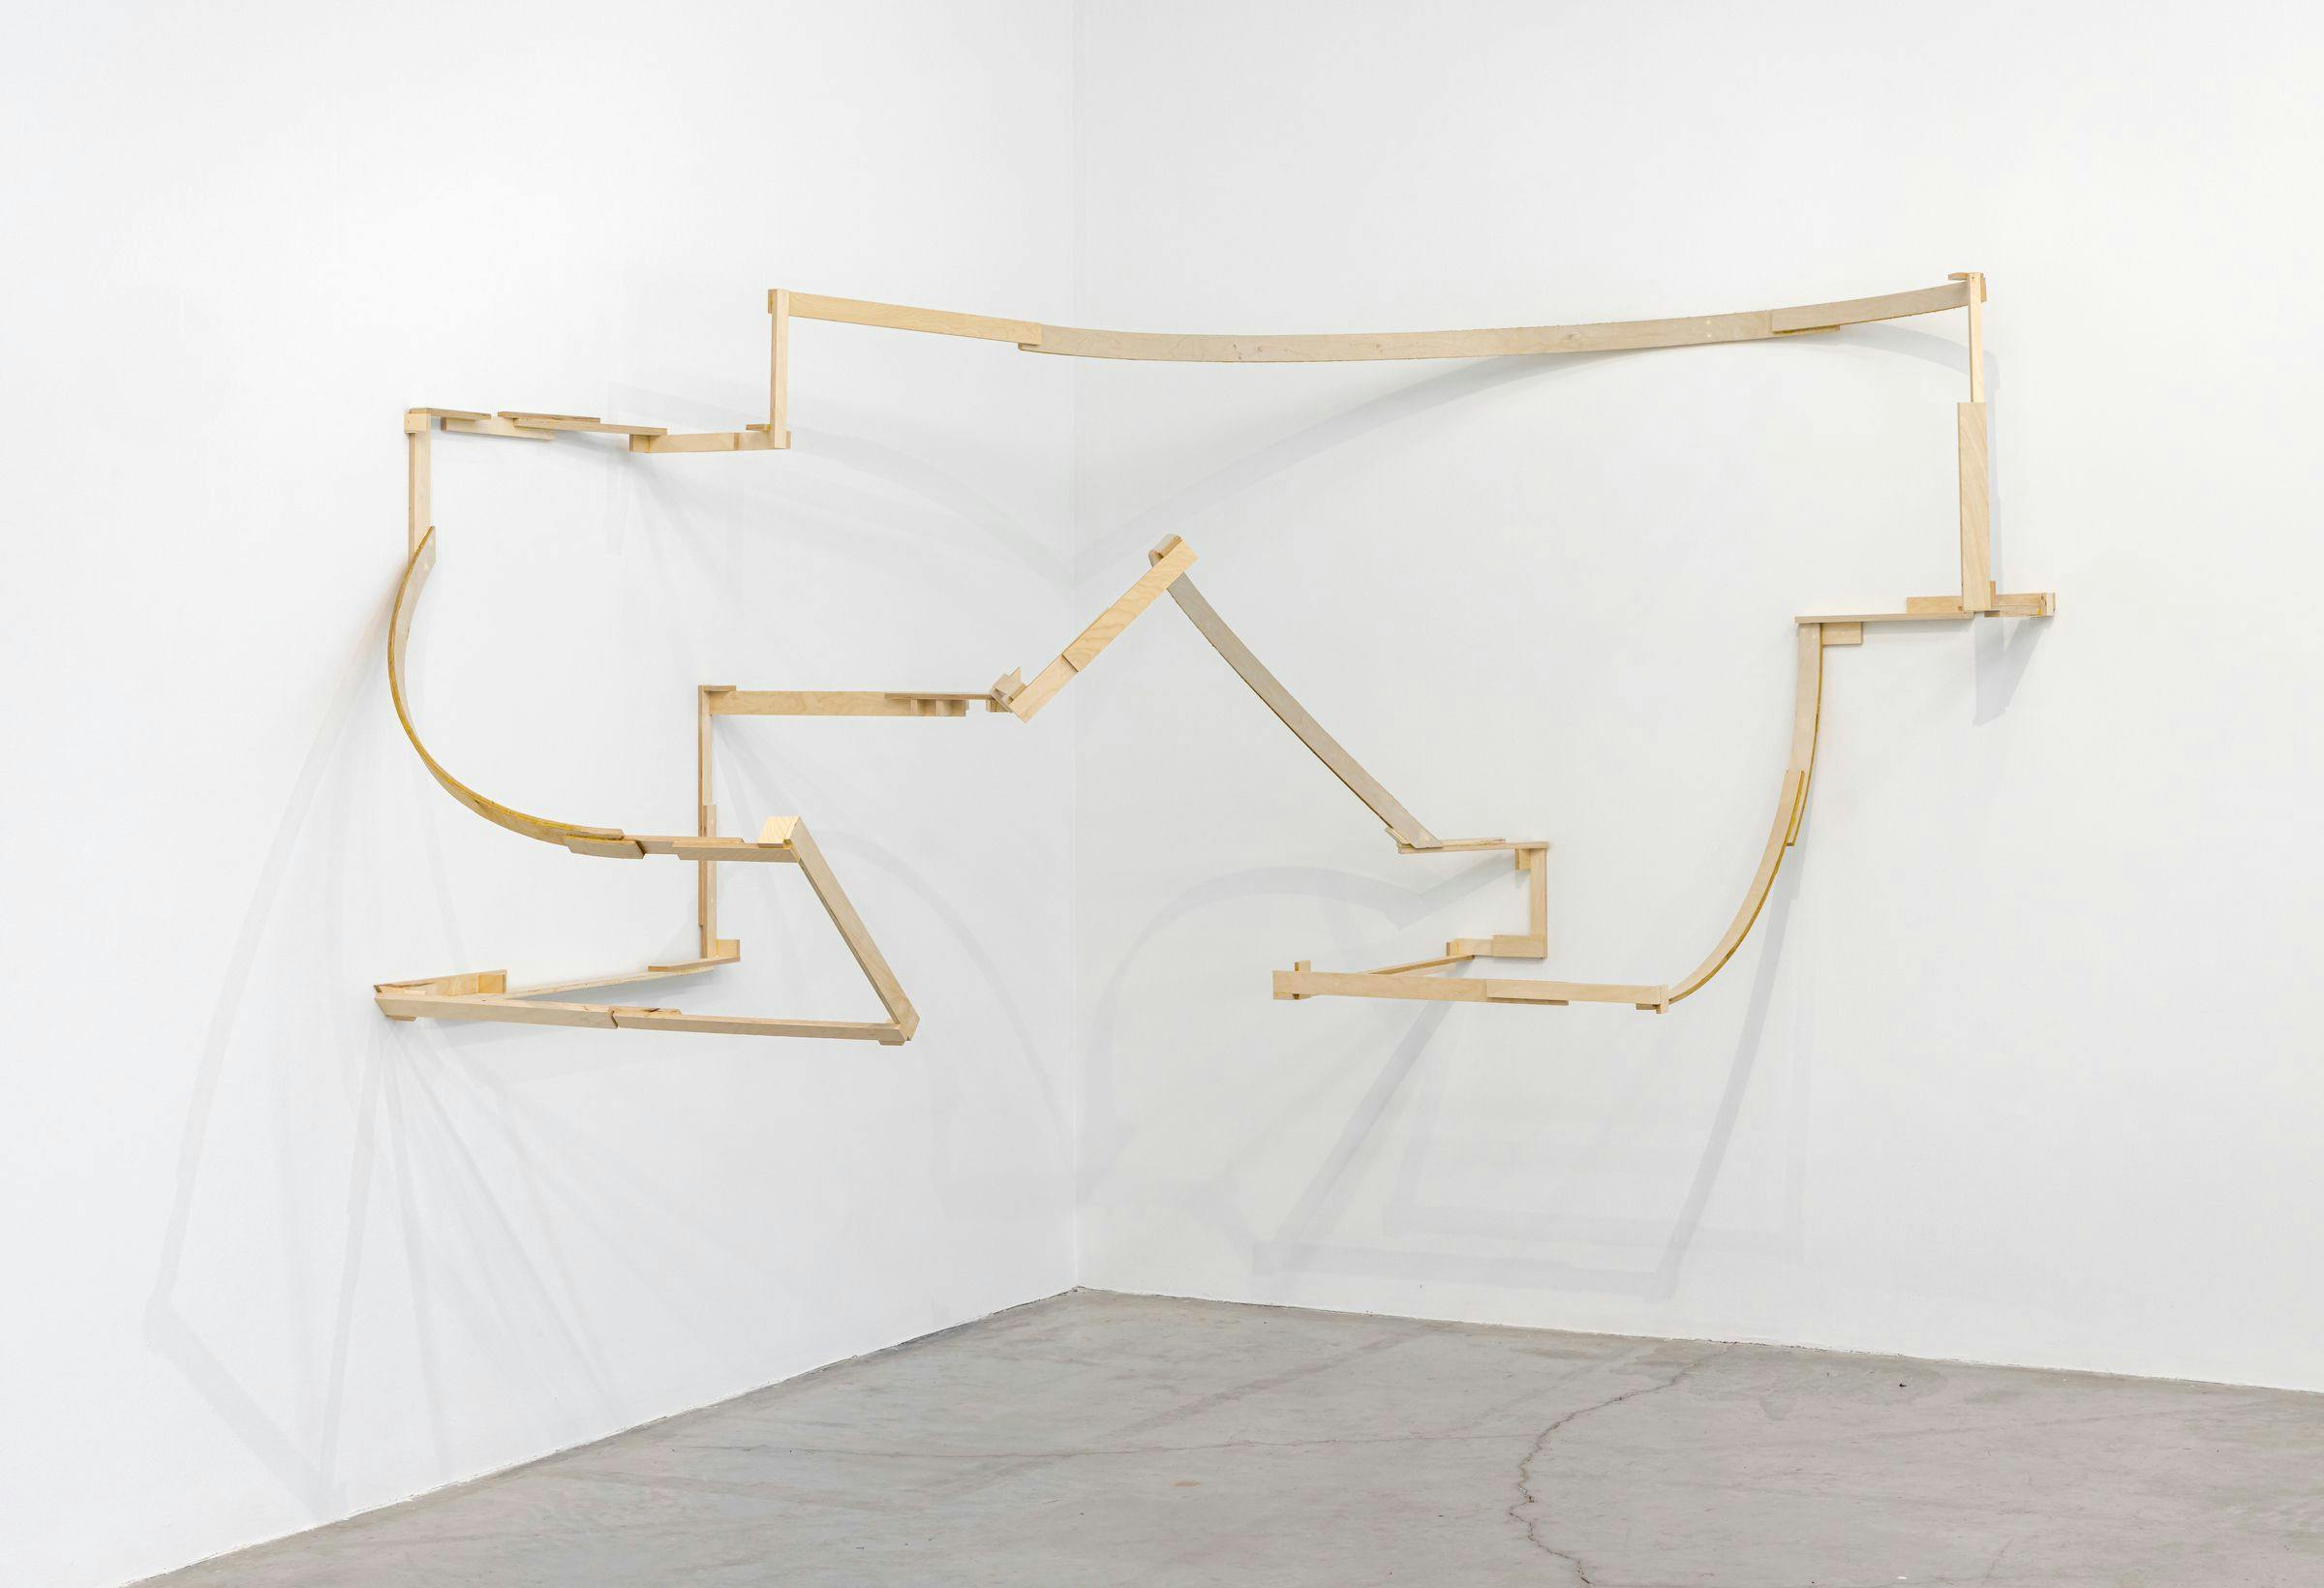 Jen Aikten, Outline 1, 2023. Plywood and glue. Commissioned by The Power Plant, 2023. Courtesy the artist, Nicholas Metivier Gallery, Toronto, and TrépanierBaer, Calgary. Photo: Toni Hafkenscheid.